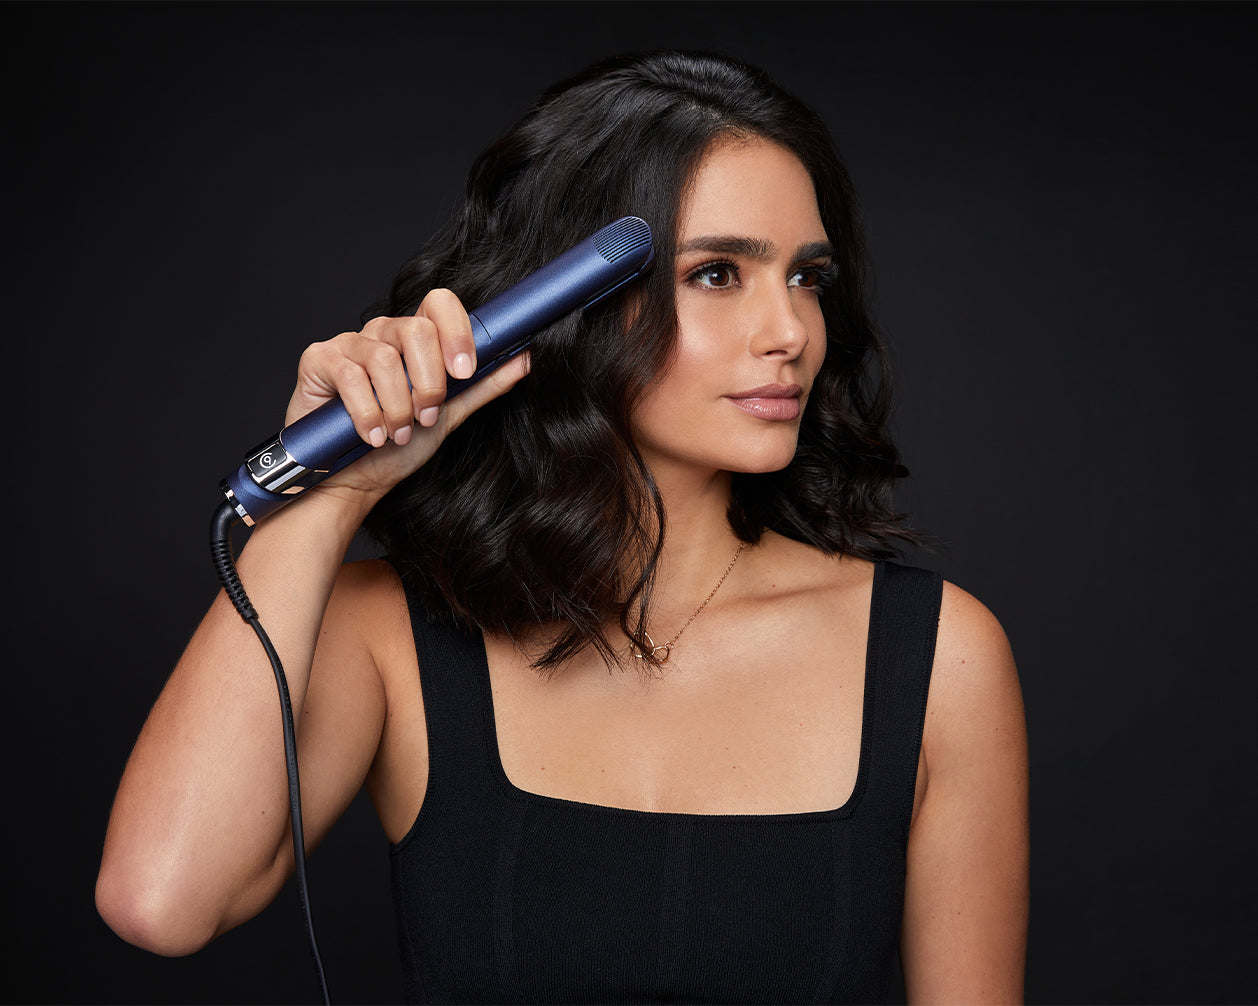 Model curling her short black hair with the 2-in-1 Contouring Iron Pro.